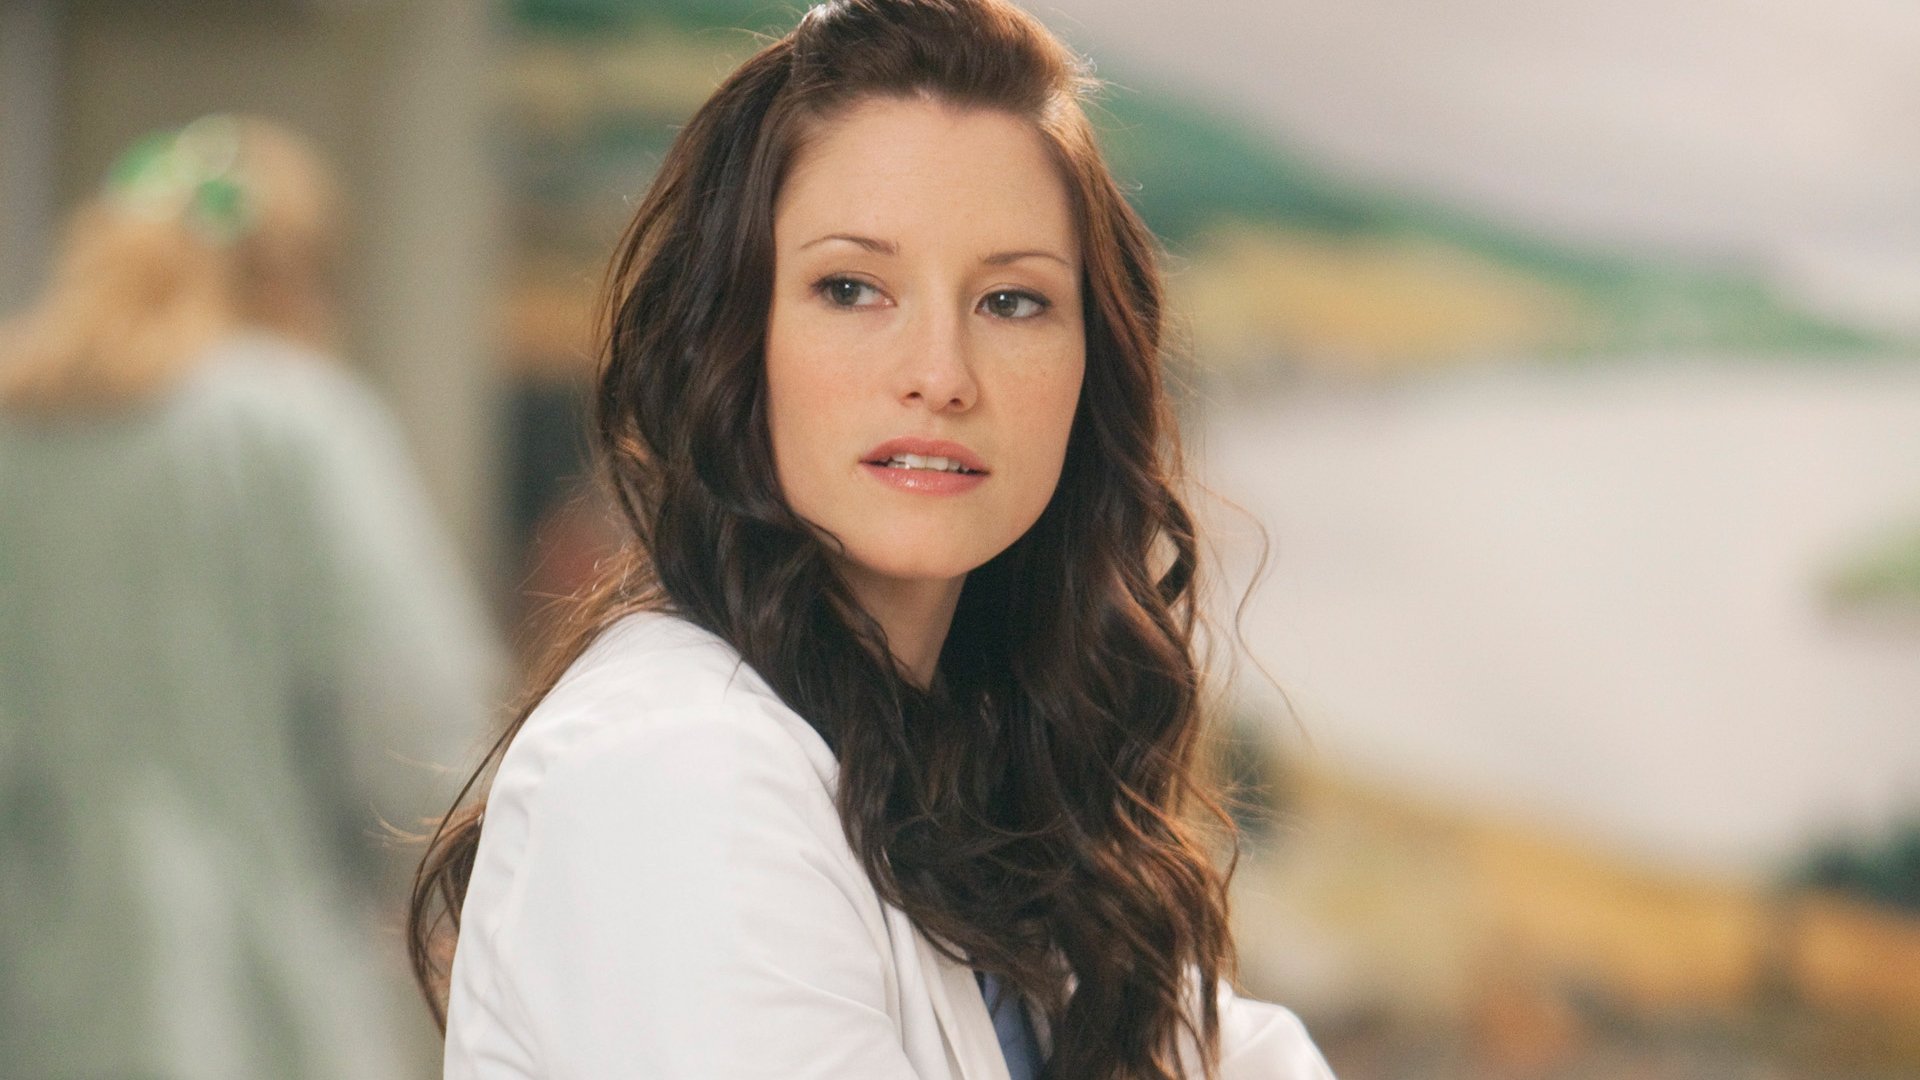 Chyler Leigh as Lexie Grey looking to the side at the hospital in ‘Grey’s Anatomy’ Season 7 